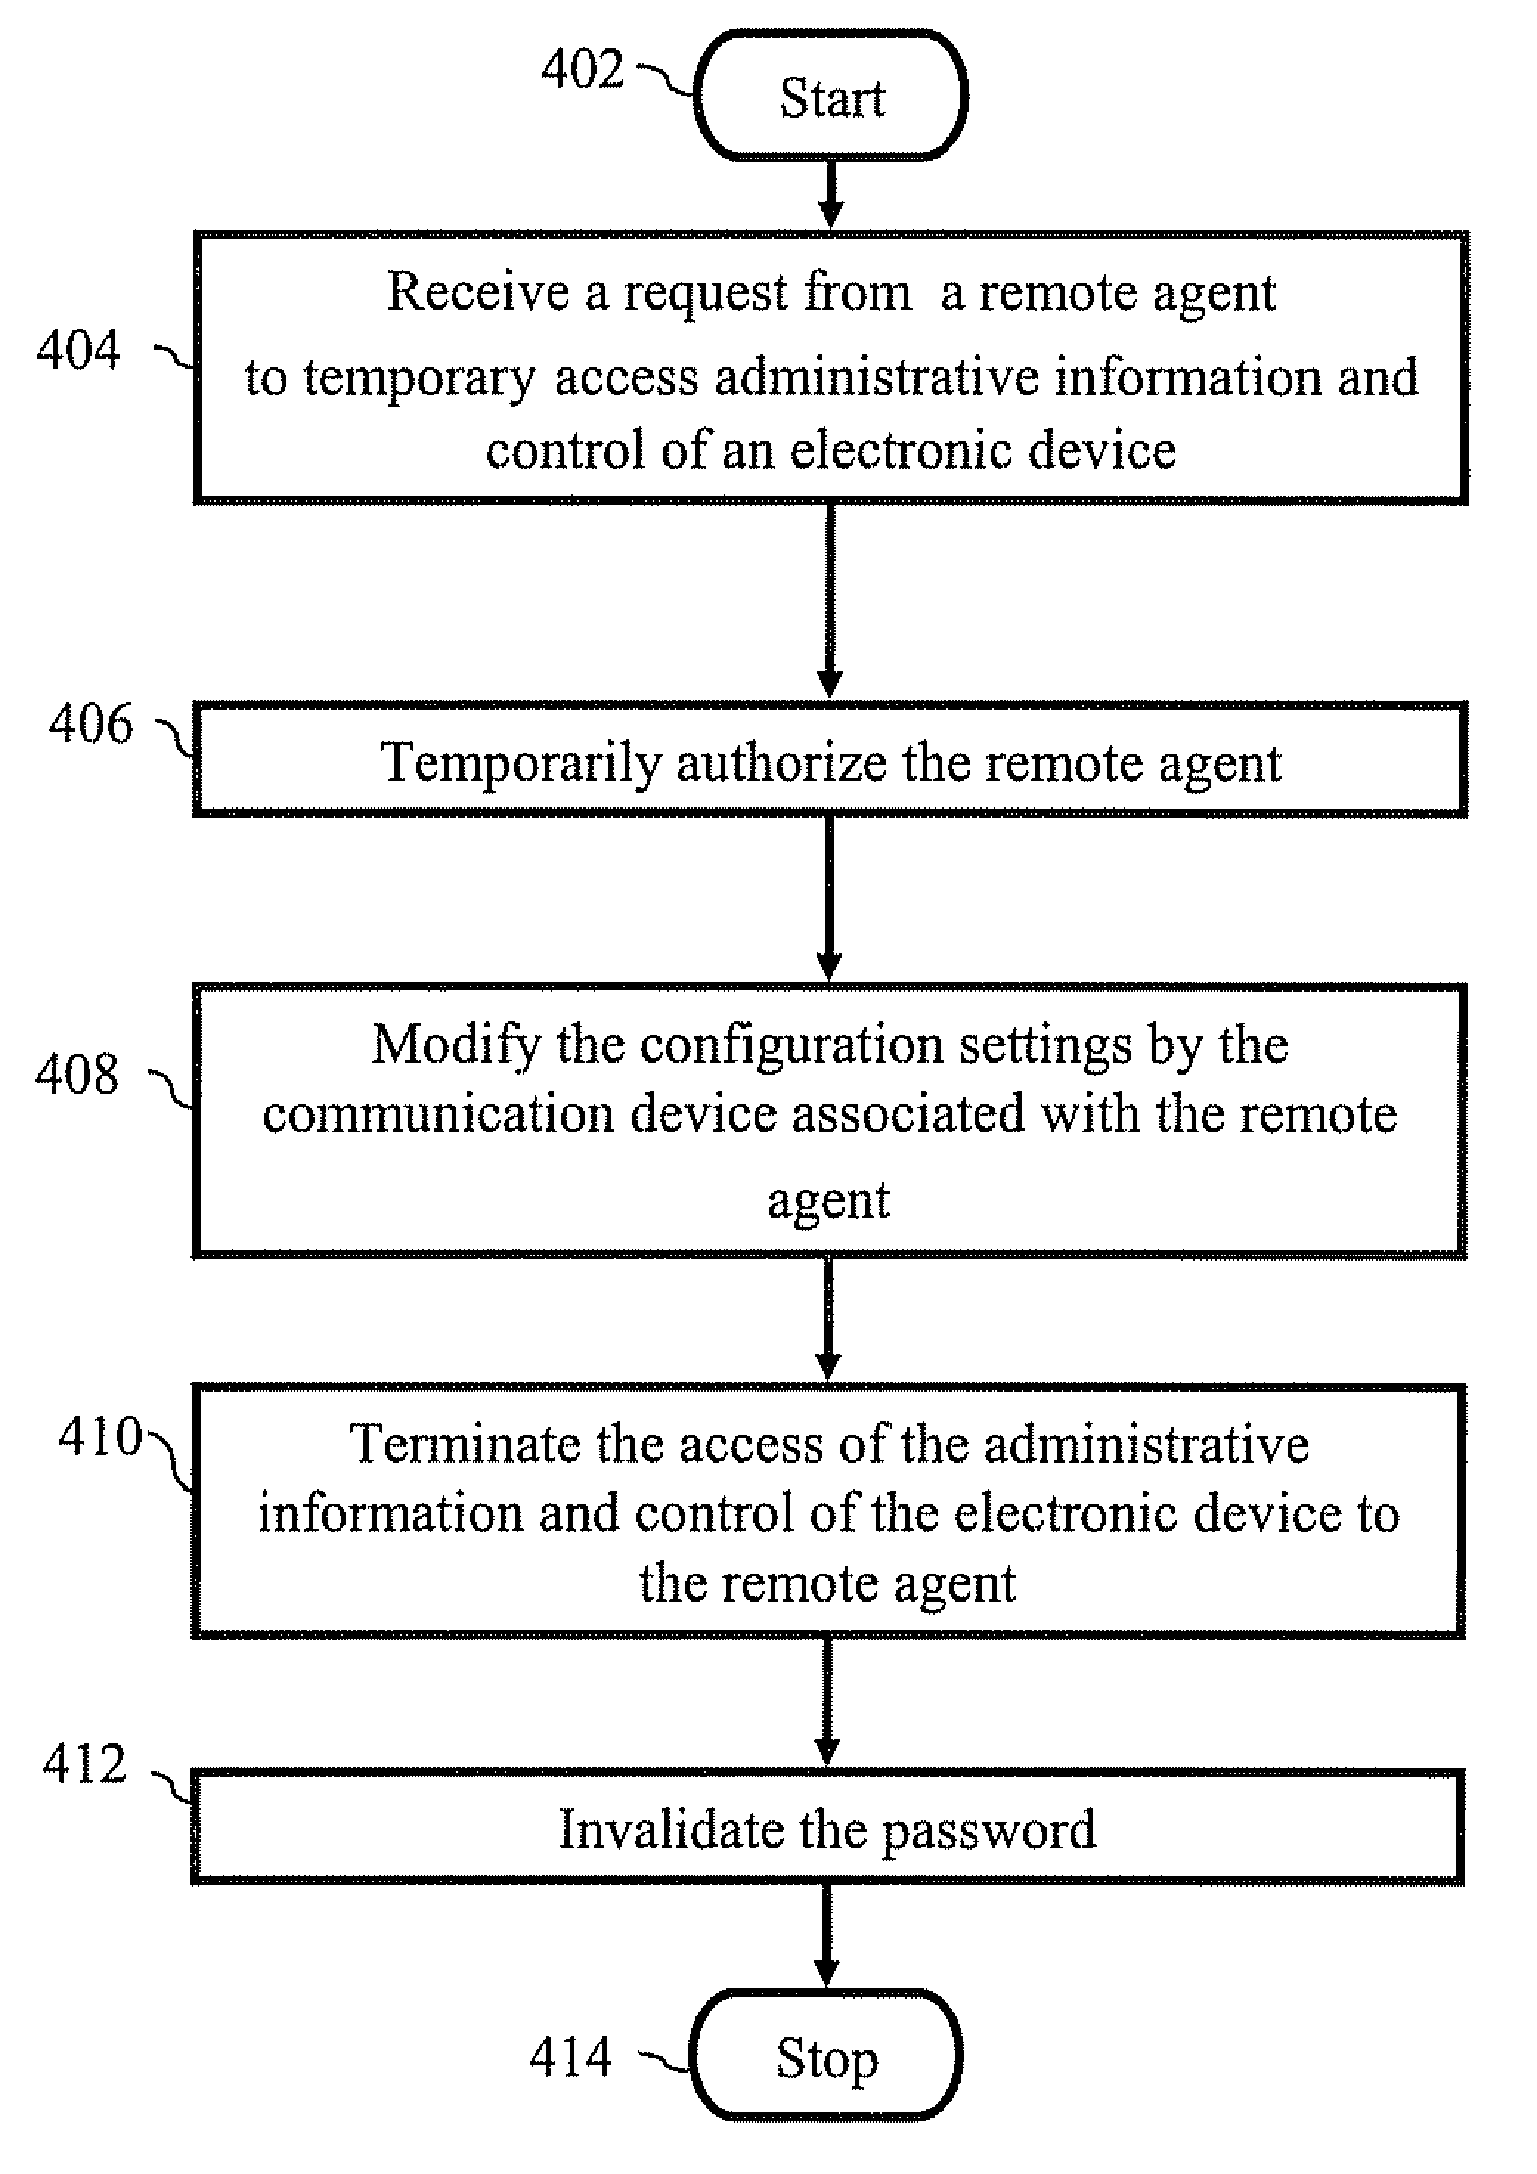 System authorizing a remote agent using a temporary password to manage configuration settings of a device and invalidating it after a fixed time interval